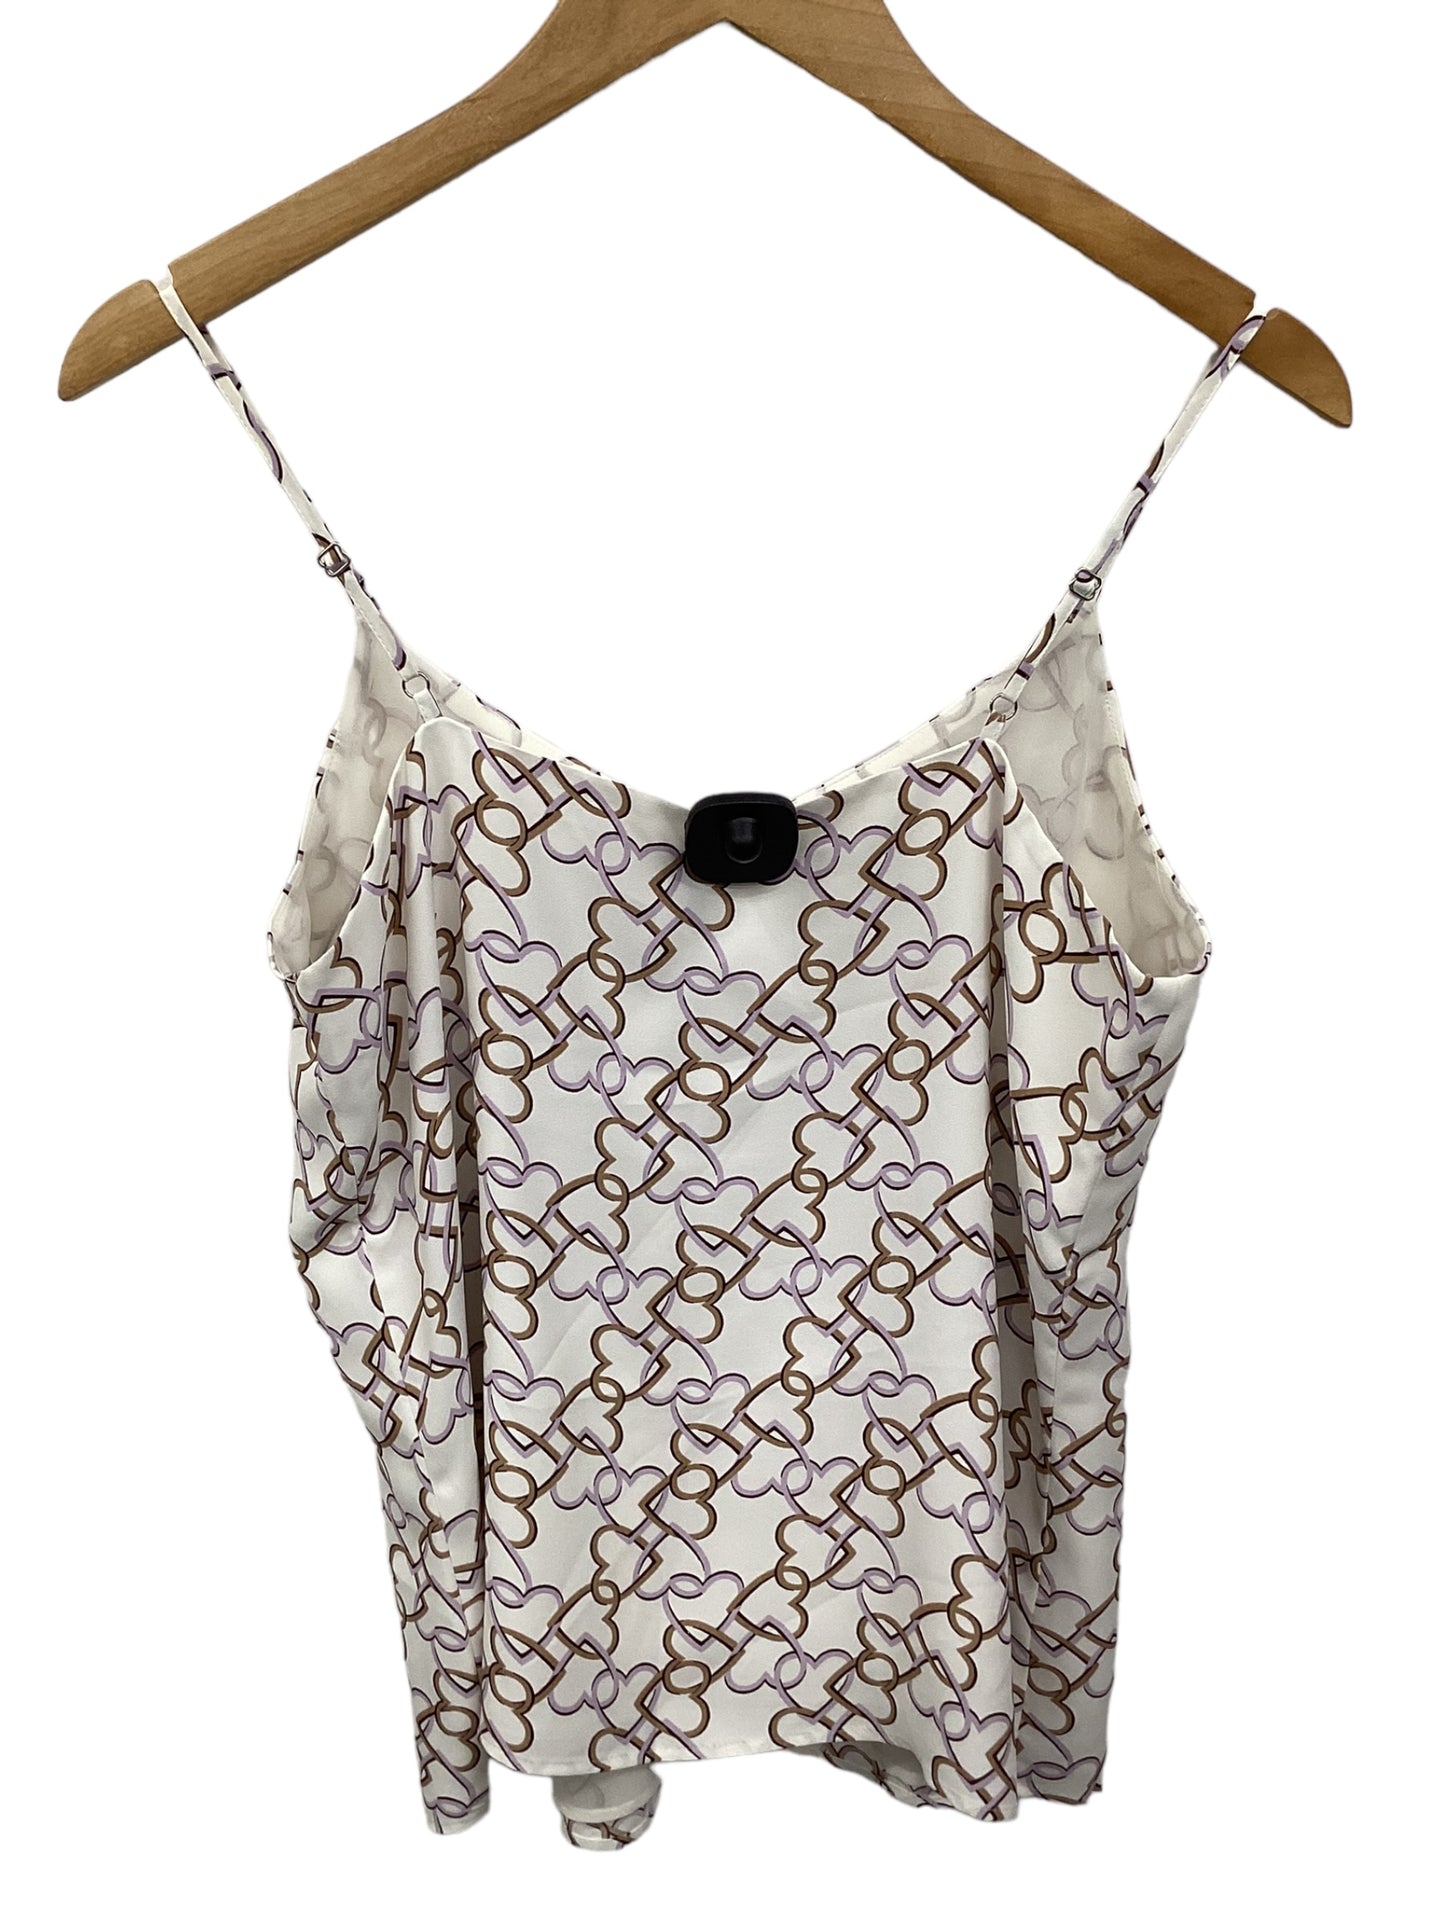 Top Sleeveless By Ann Taylor  Size: S